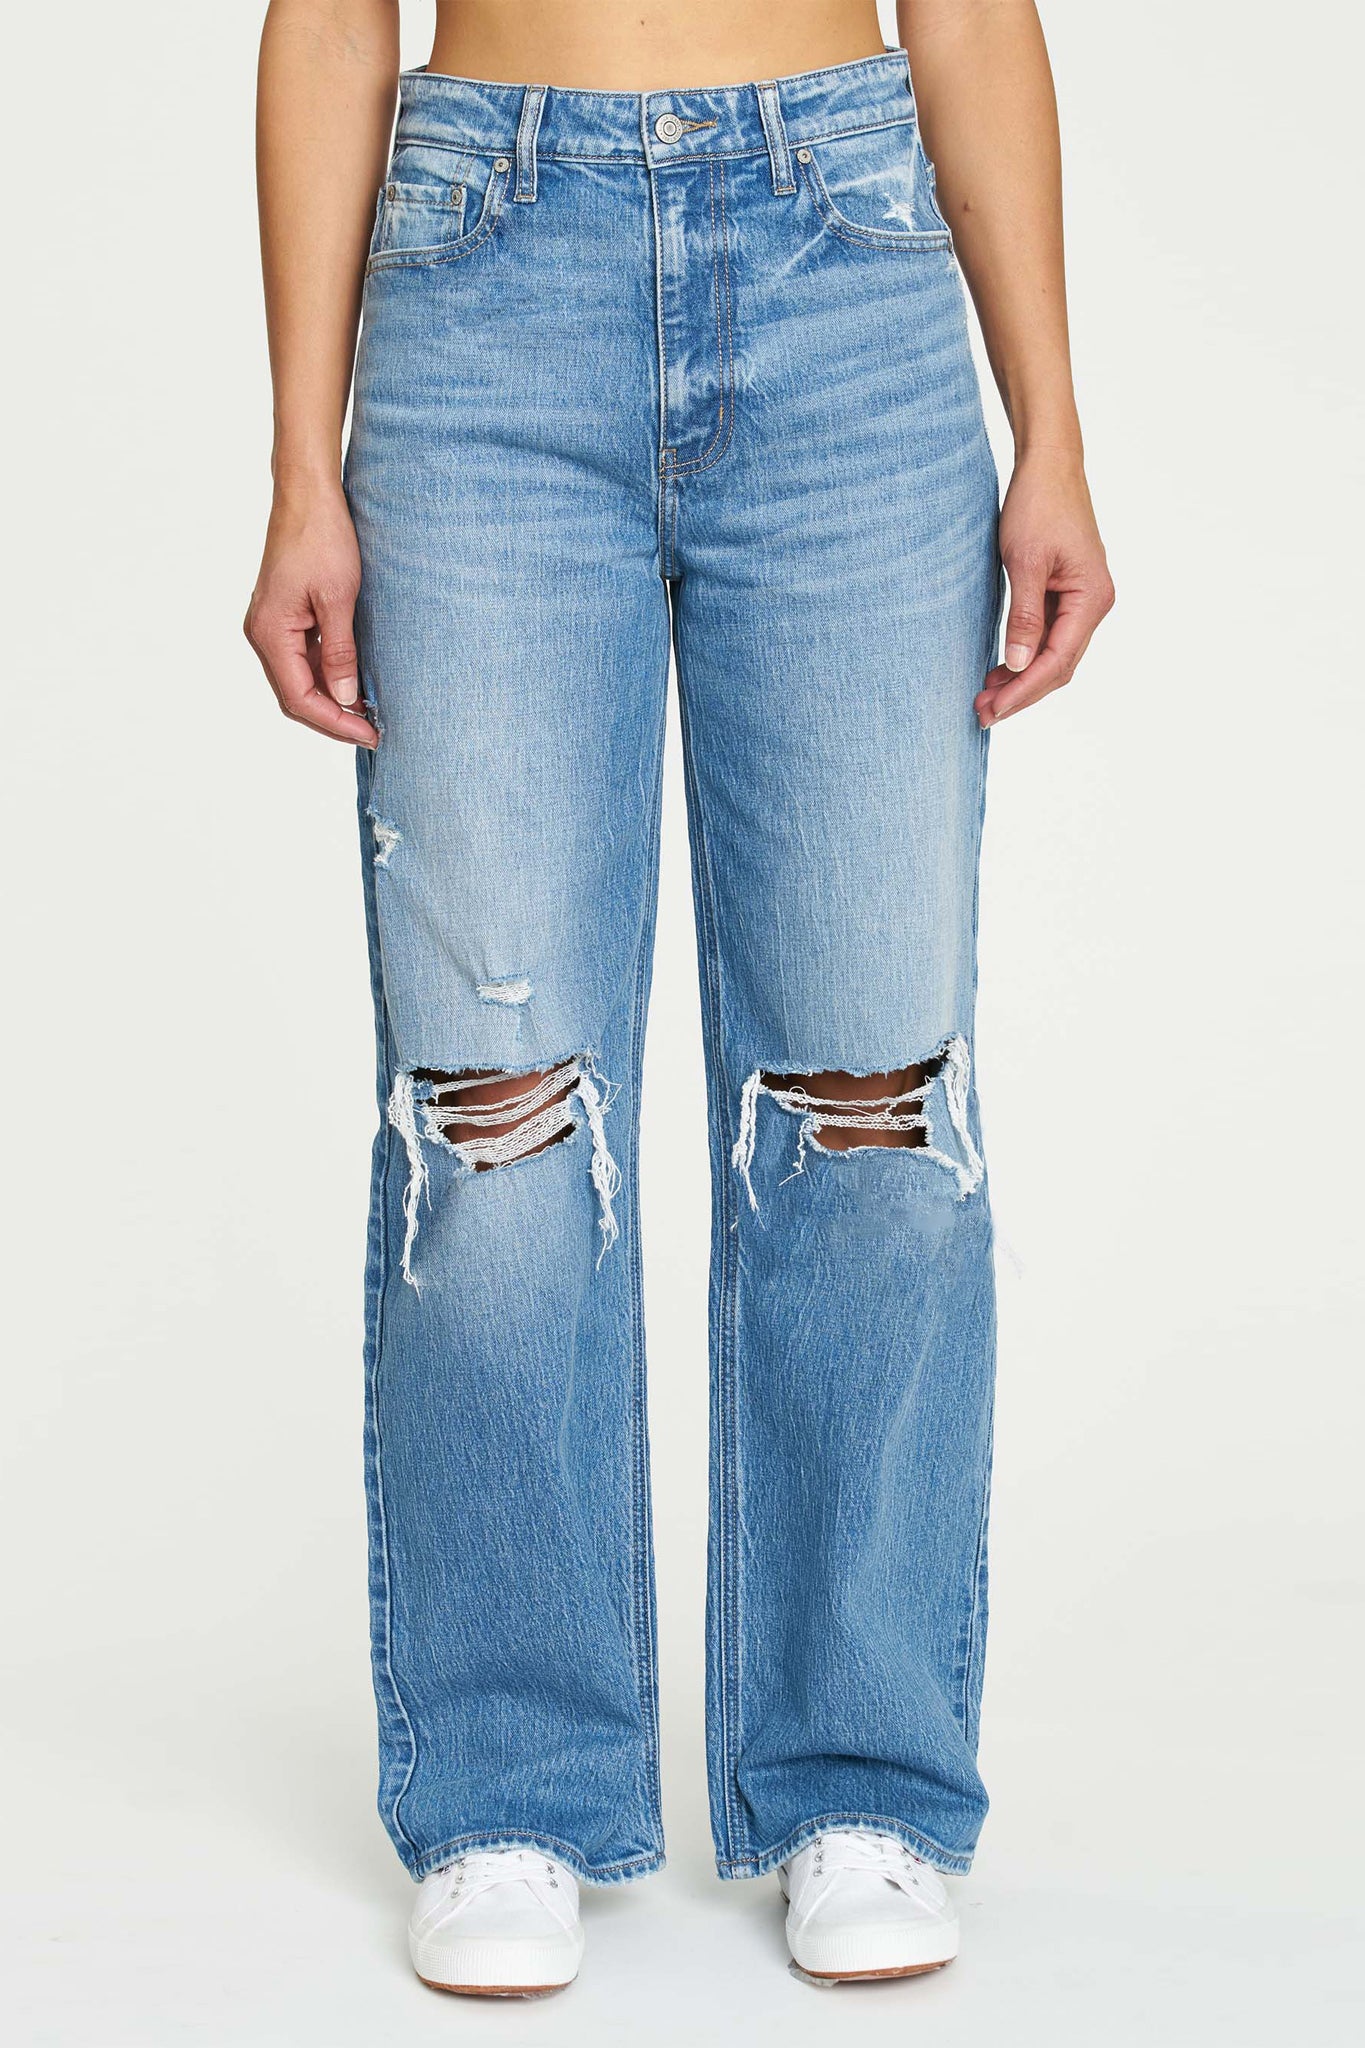 Eunina Ryder Baggy Jeans in Smoke Tree